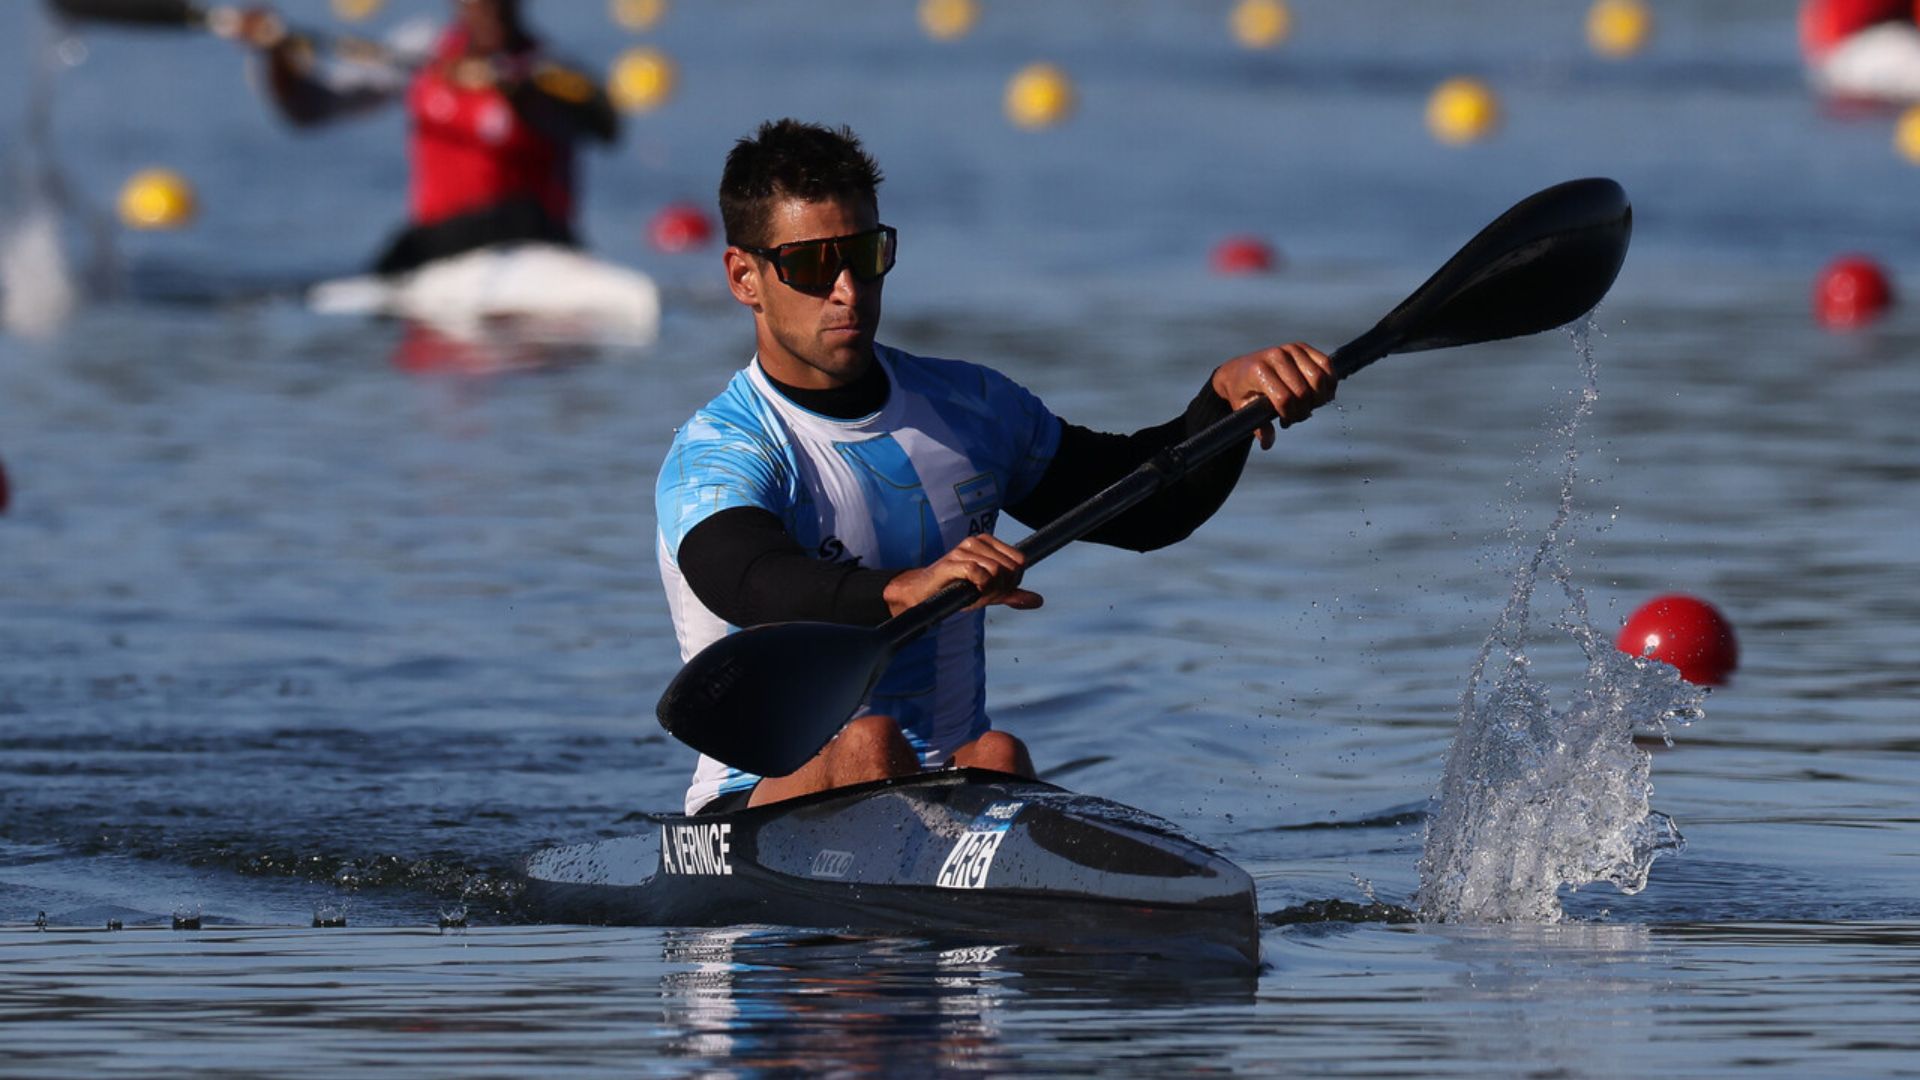 Agustín Vernice excells in Kayak and adds a gold medal for Argentina